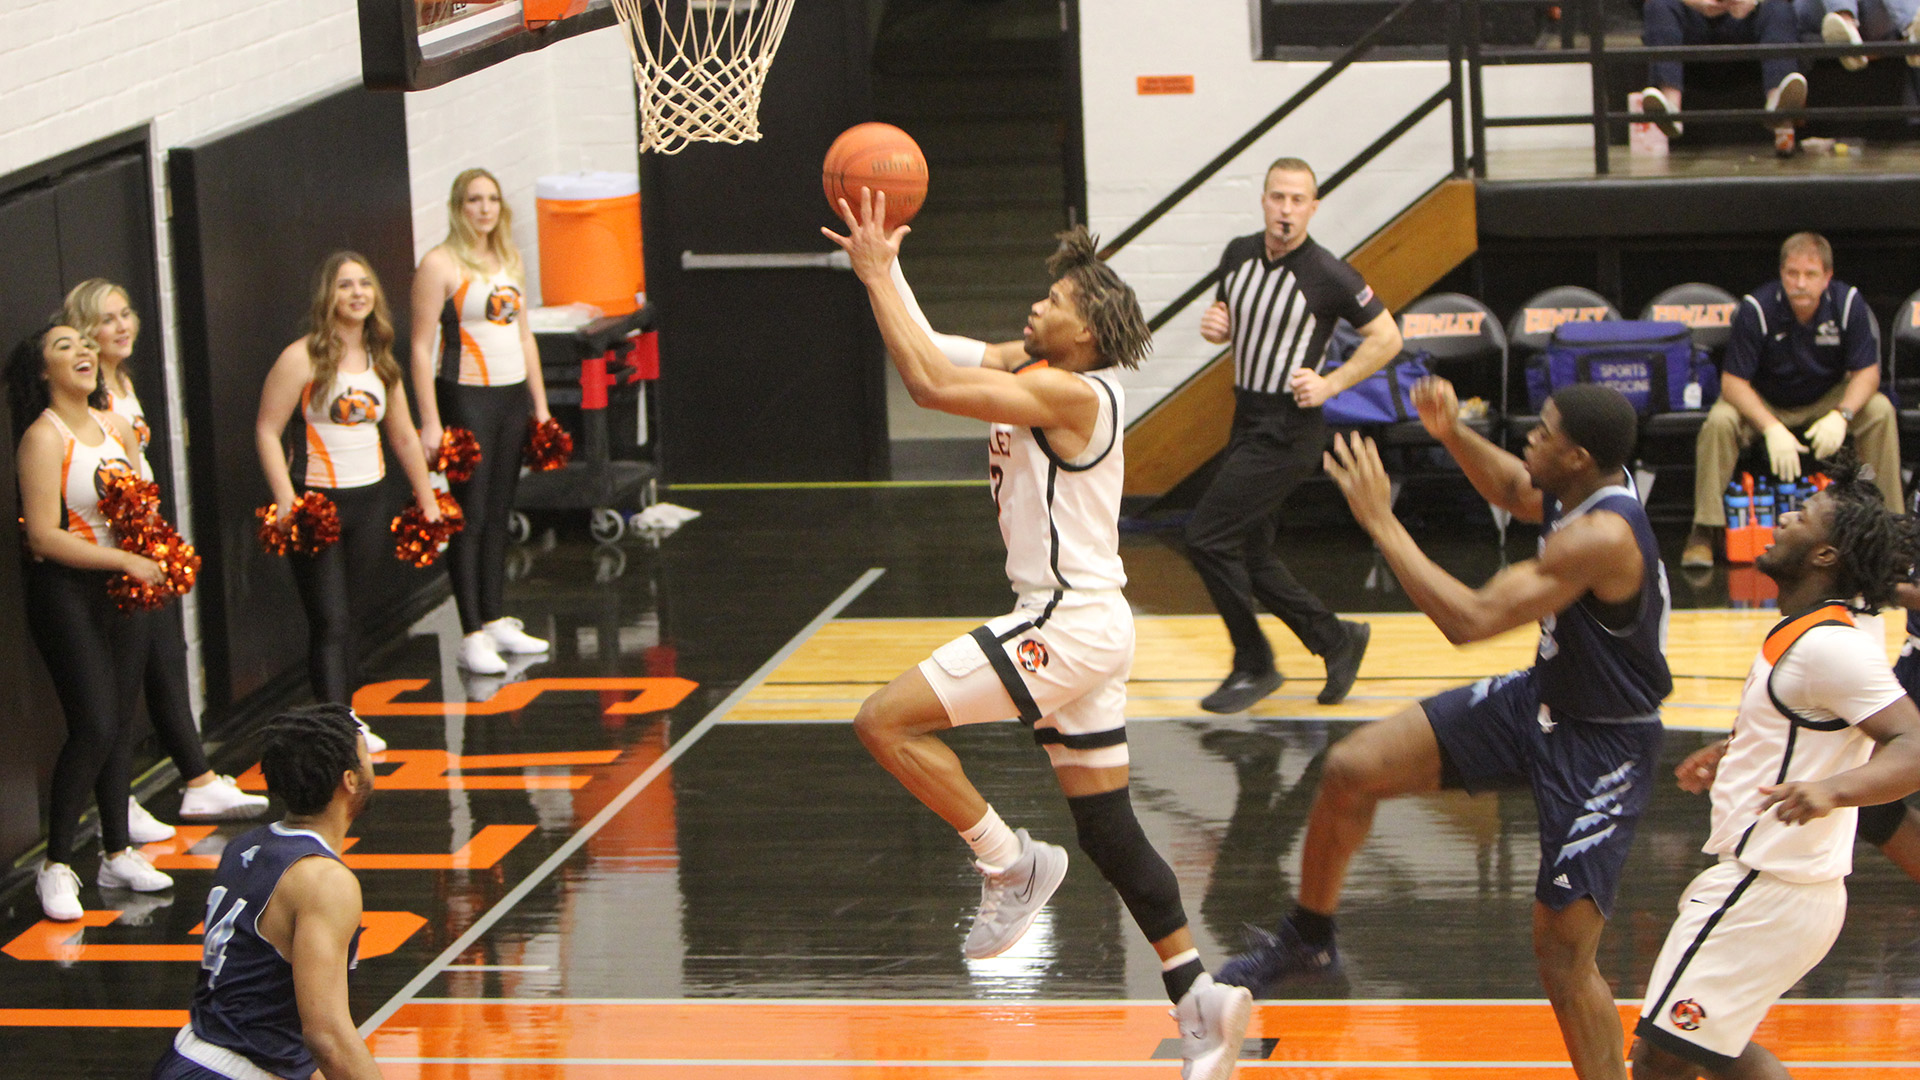 Tigers return with 80-79 win over No. 21-ranked Colby Community College